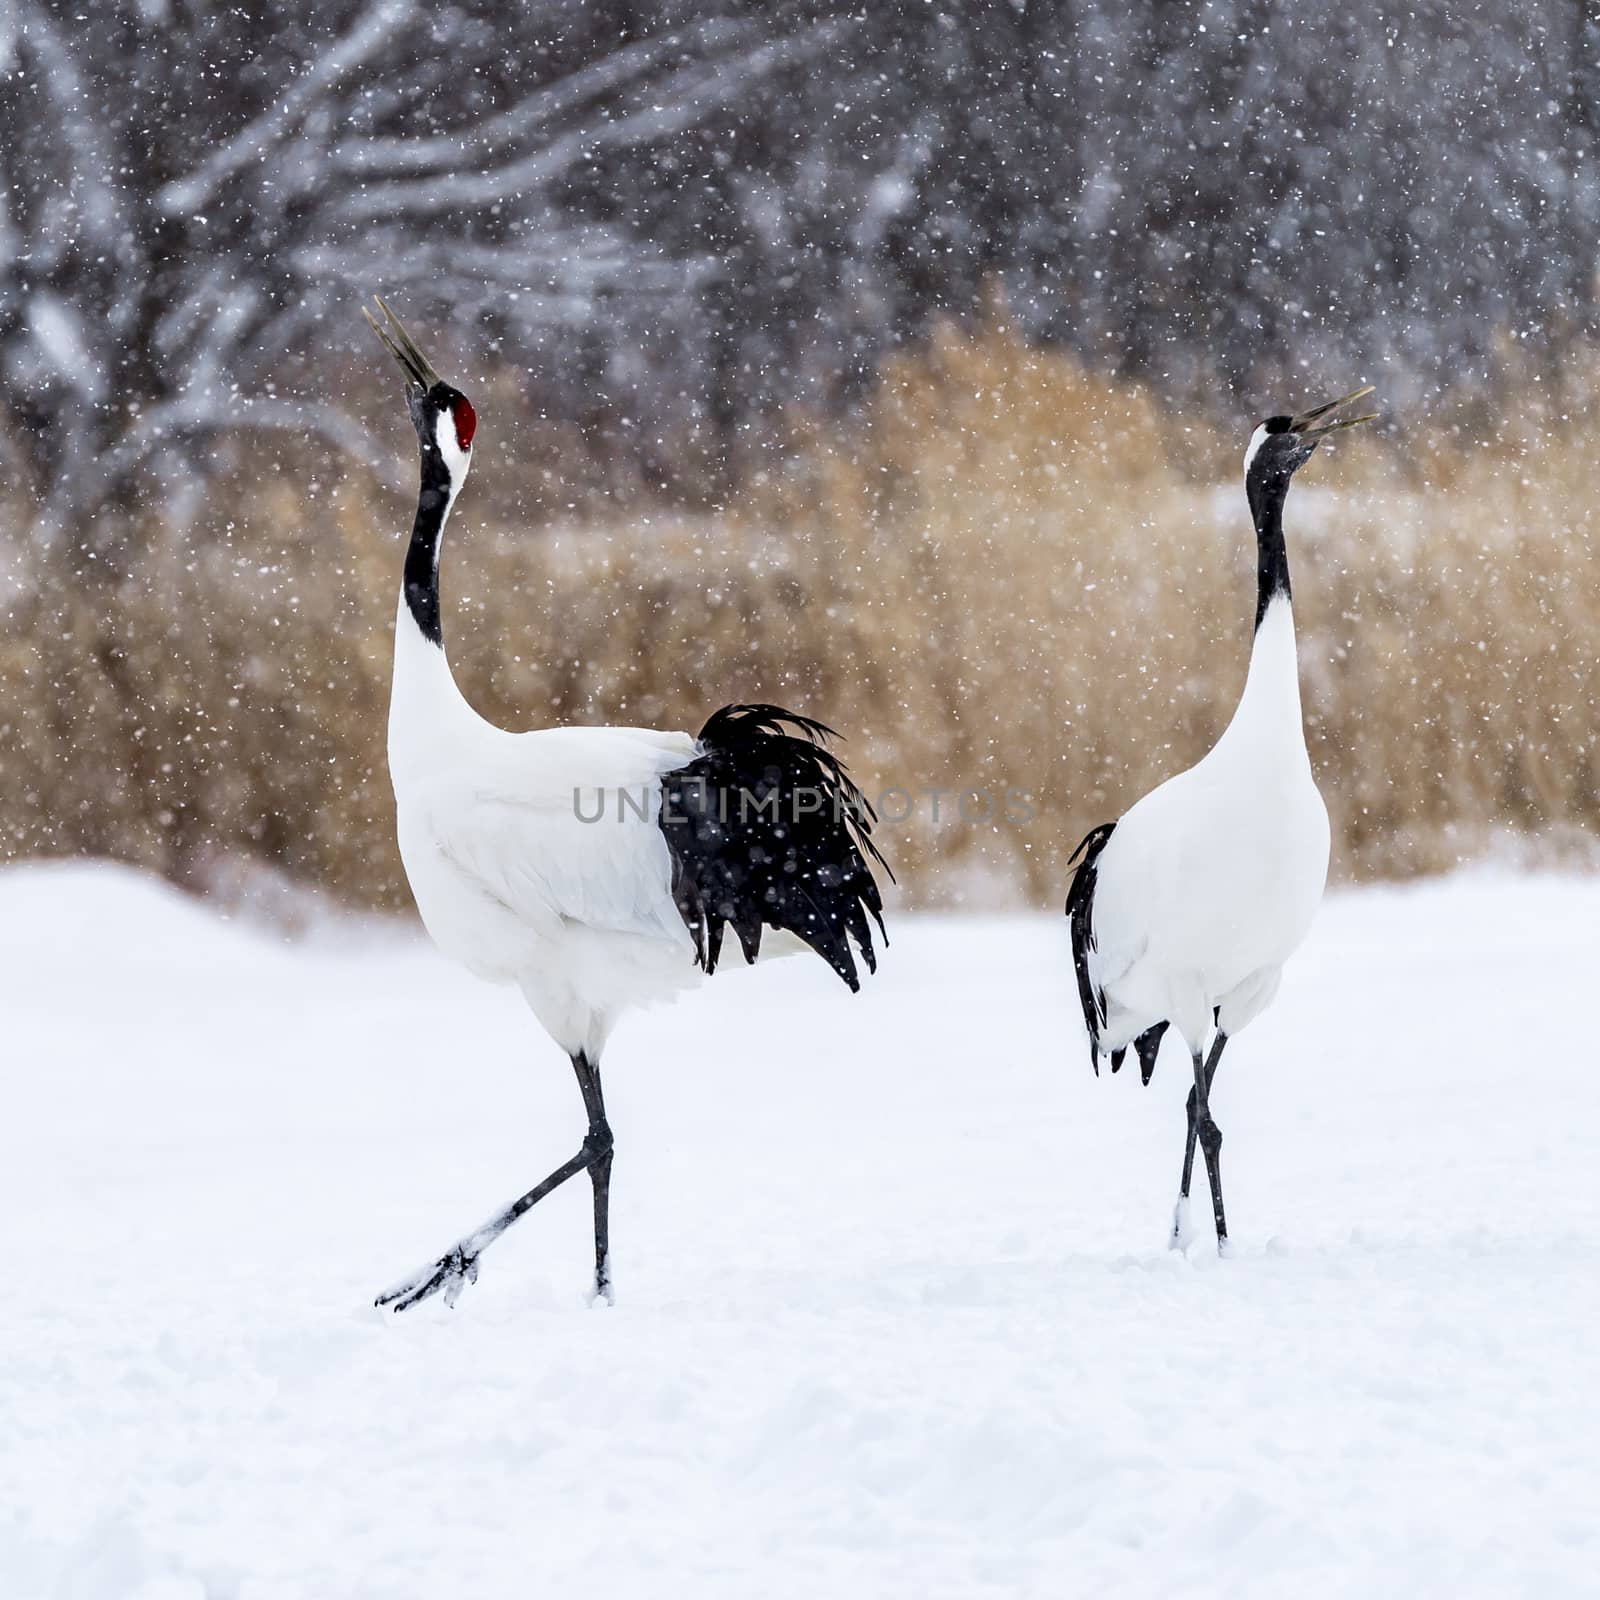 The Red-crowned Crane by JasonYU